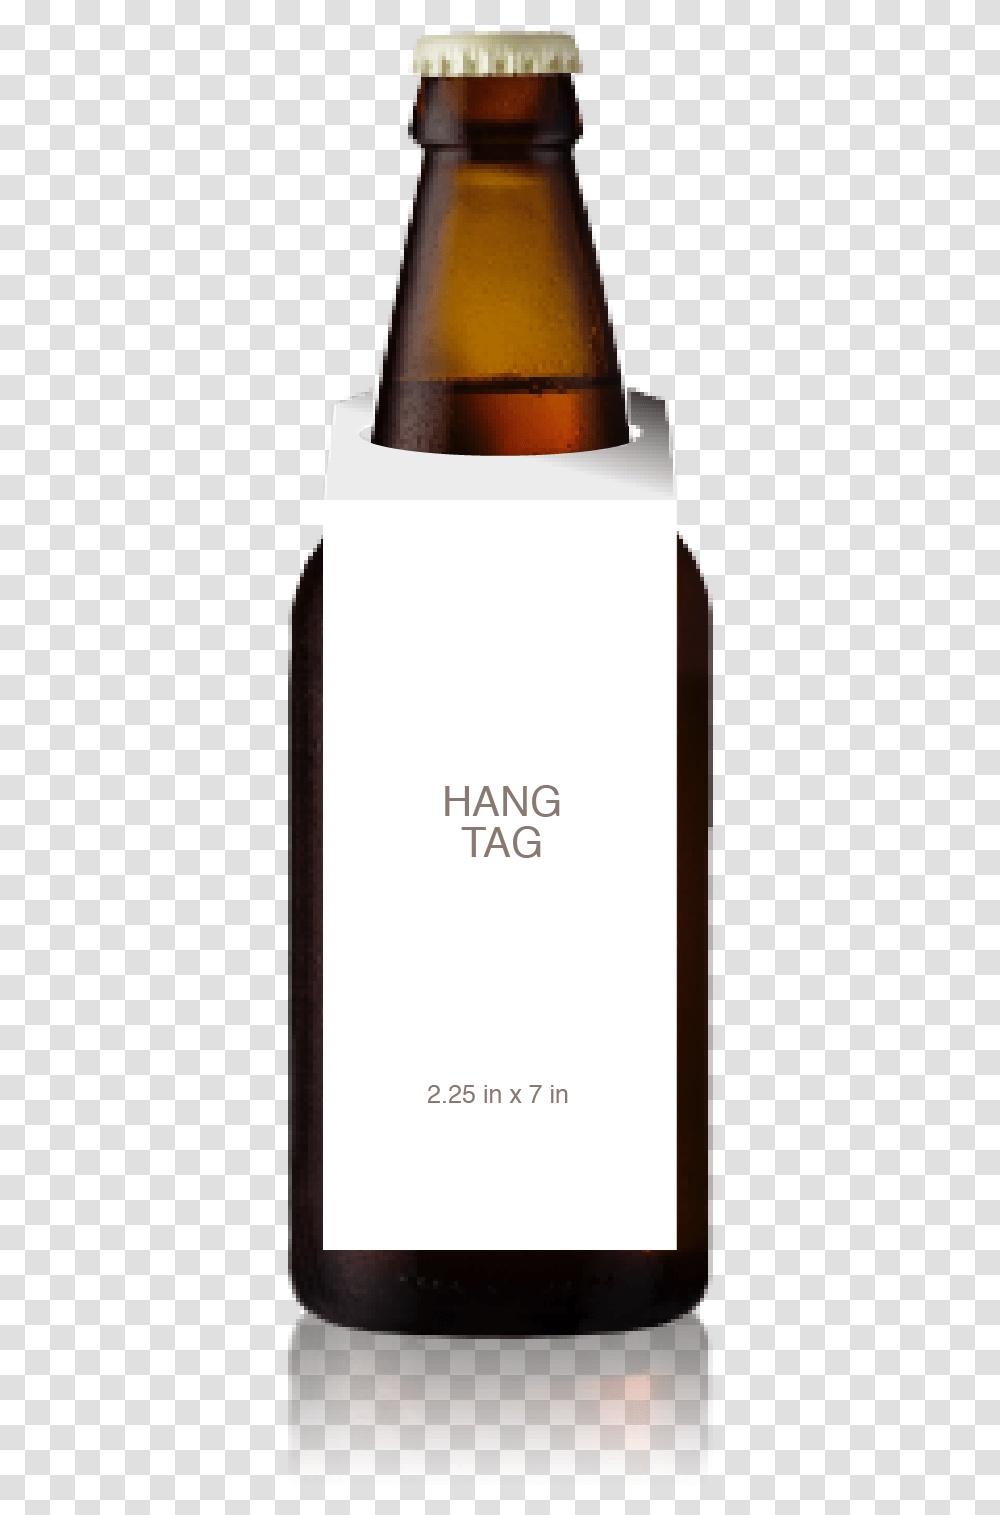 Short Bottle With A Blank Hangtag From Crushtag, Lamp, Arrow, Screen Transparent Png